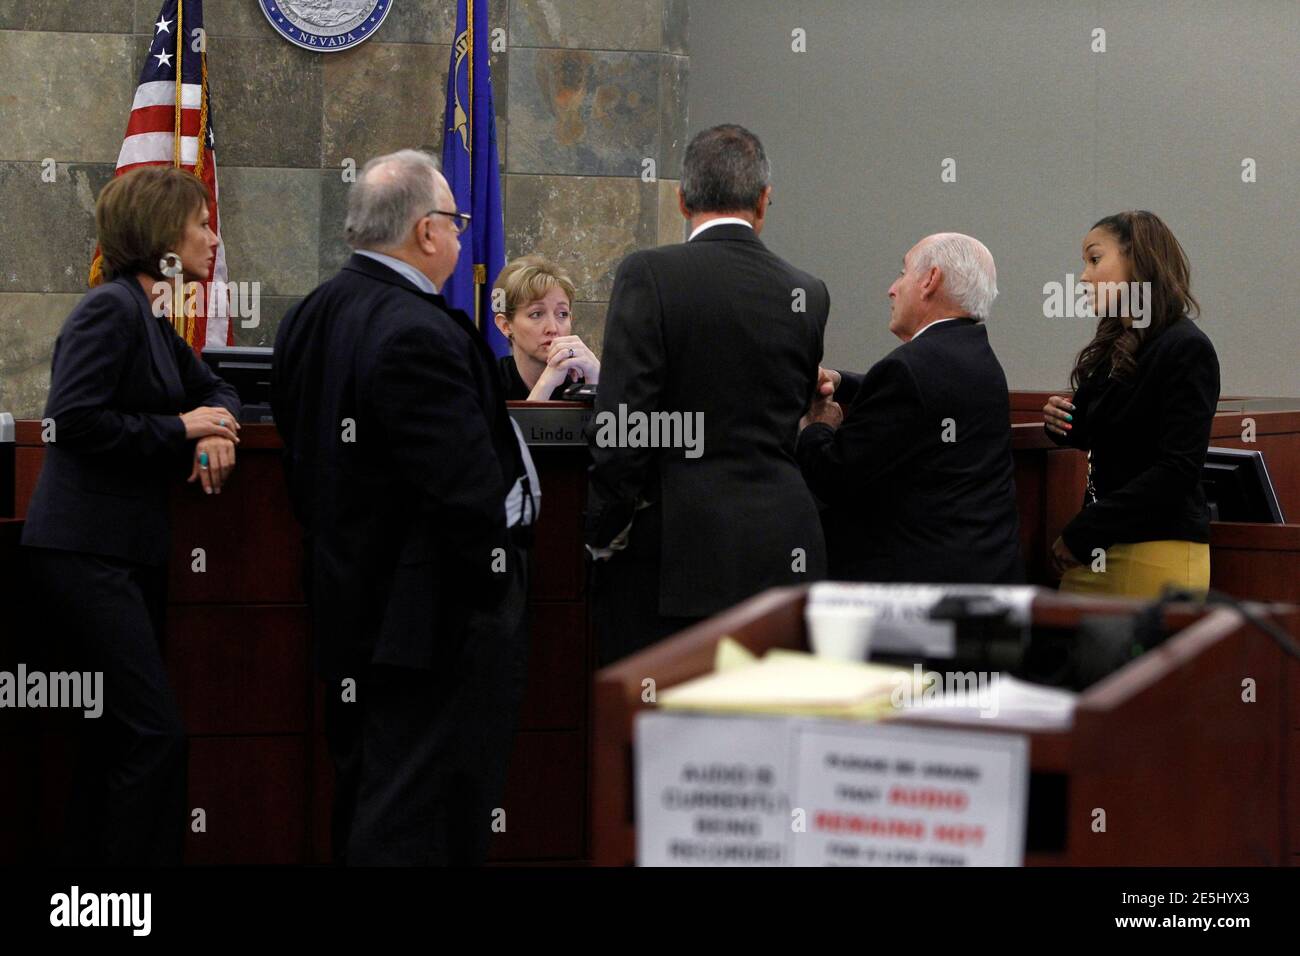 Judge Linda Marie Bell speaks with attorneys during a break in O.J. Simpson's evidentiary hearing in Clark County District Court on May 17, 2013 in Las Vegas, Nevada. Attorneys (L-R) are: Patricia Palm, Tom Pitaro, Ozzie Fumo, H. Leon Simon, chief deputy Clark County district attorney, and Leah Beverly, deputy Clark County district attorney. Simpson, who is currently serving a nine-to-33-year sentence in state prison as a result of his October 2008 conviction for armed robbery and kidnapping charges, is using a writ of habeas corpus to seek a new trial, claiming he had such bad representation  Stock Photo